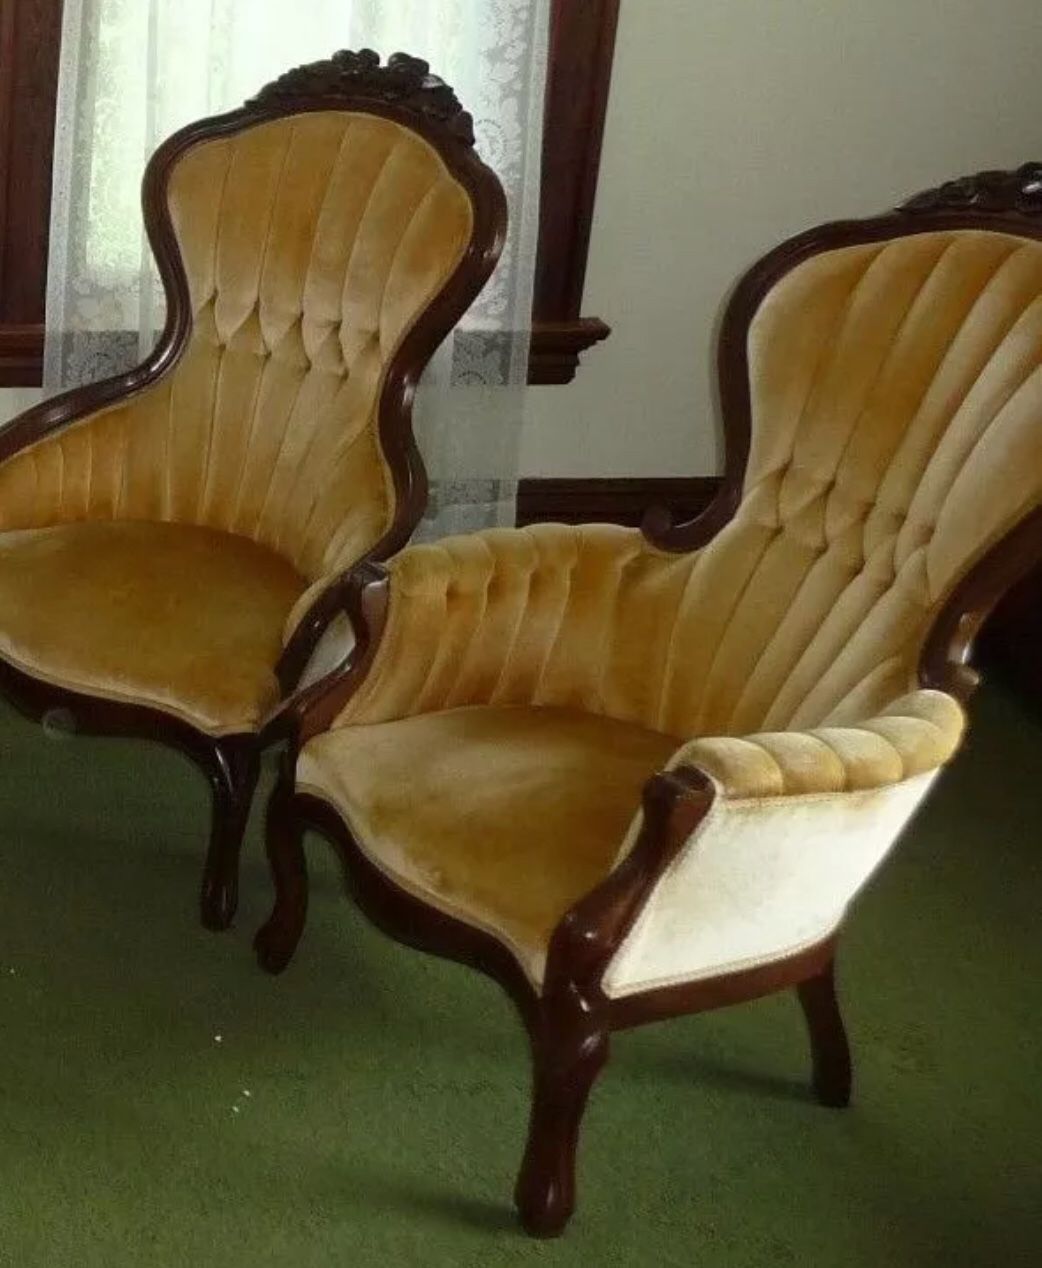 Kimball Solid Mahogany Victorian style parlor chair (2 chairs)